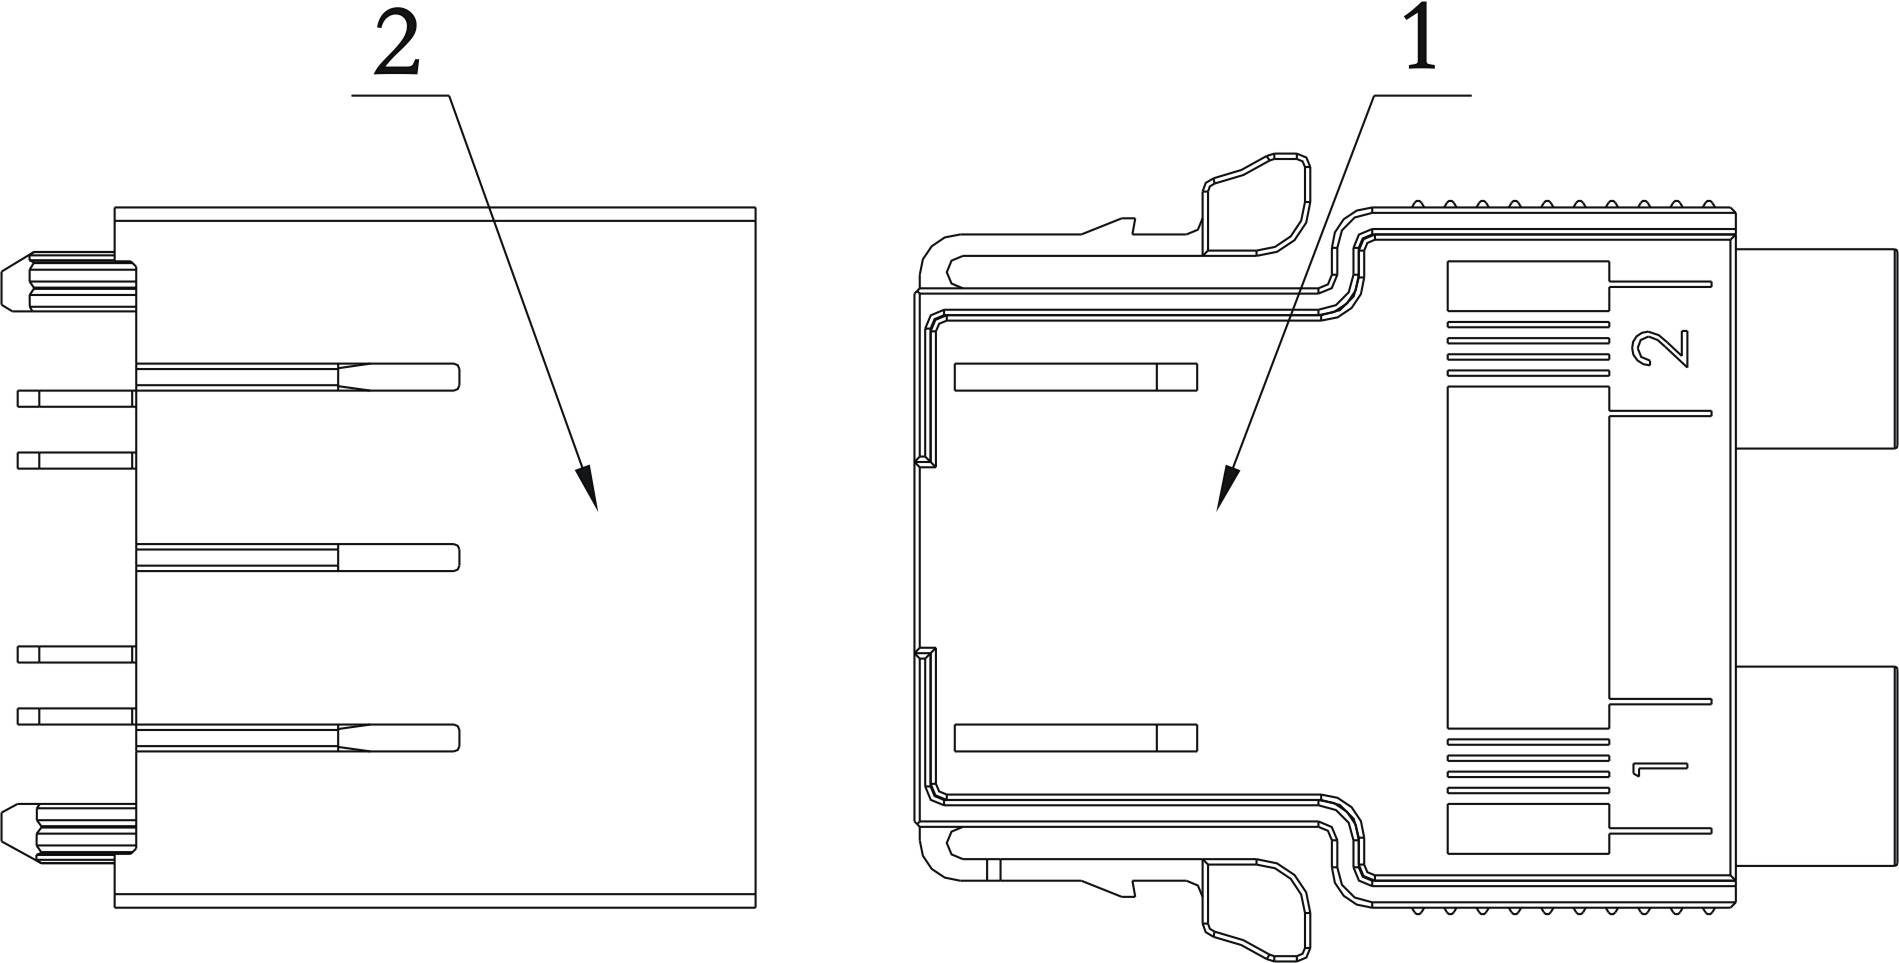 Fast wiring interlocking electrical connector